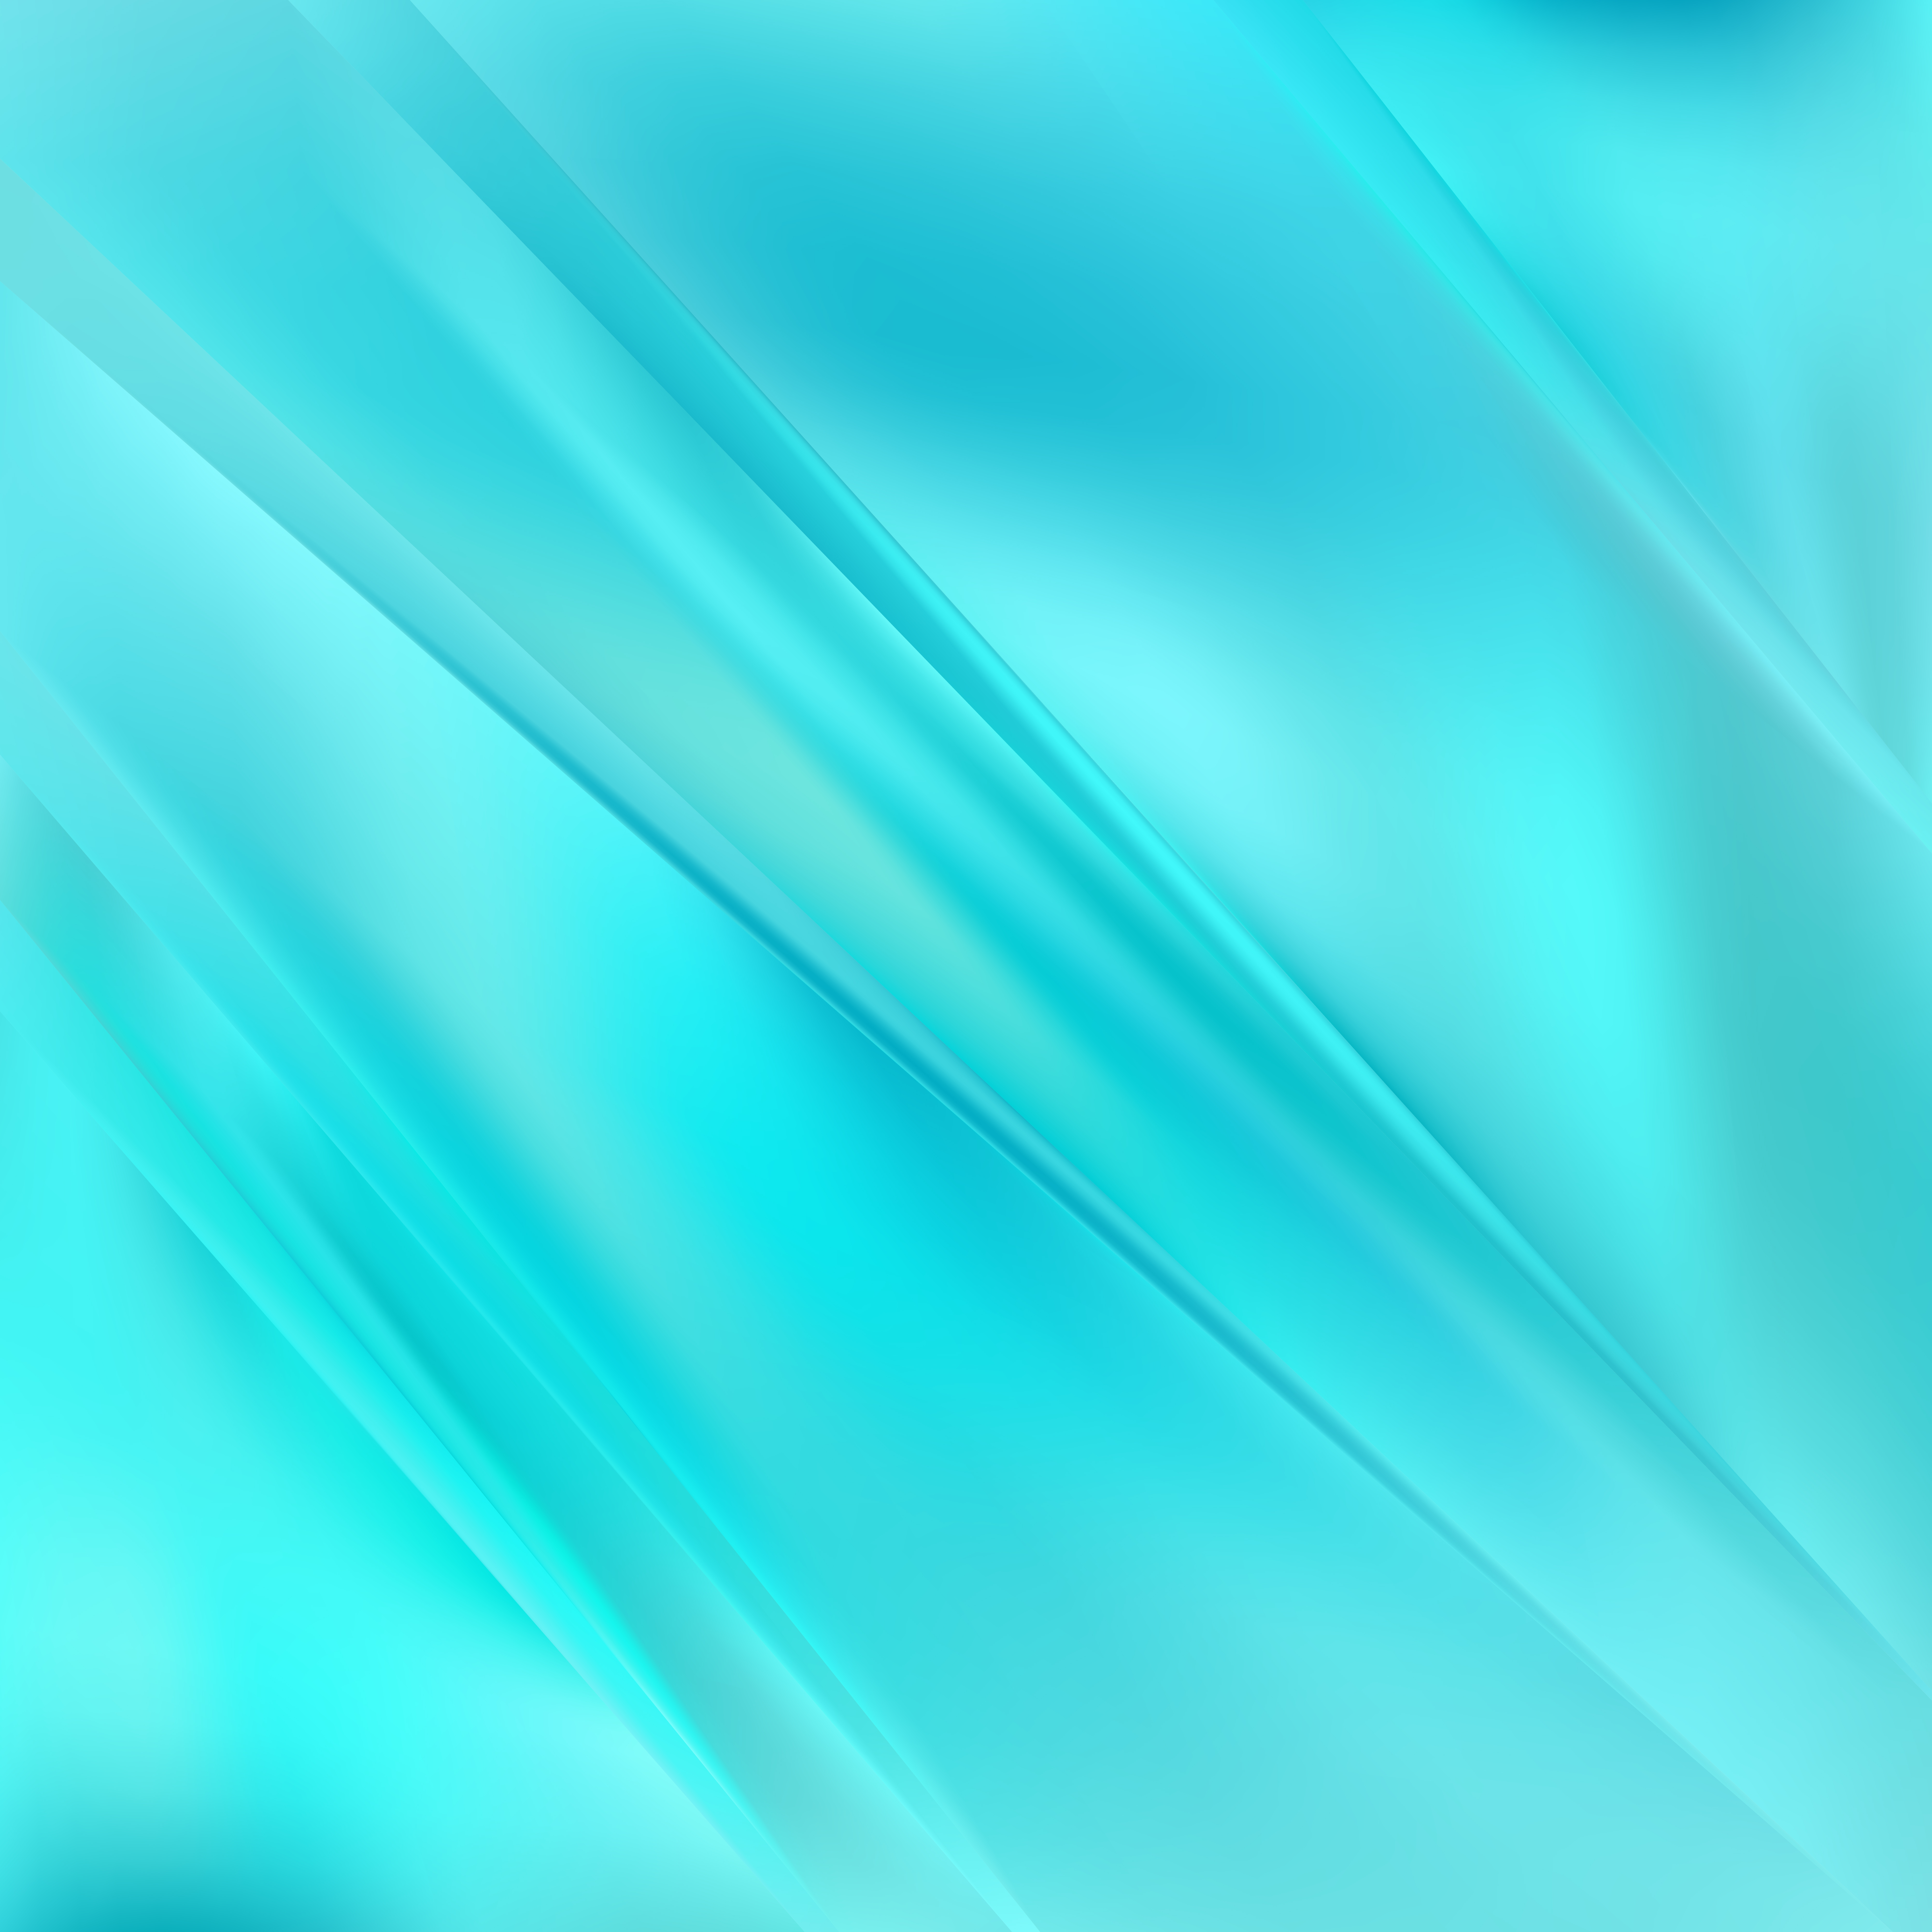 Free Abstract Turquoise Background